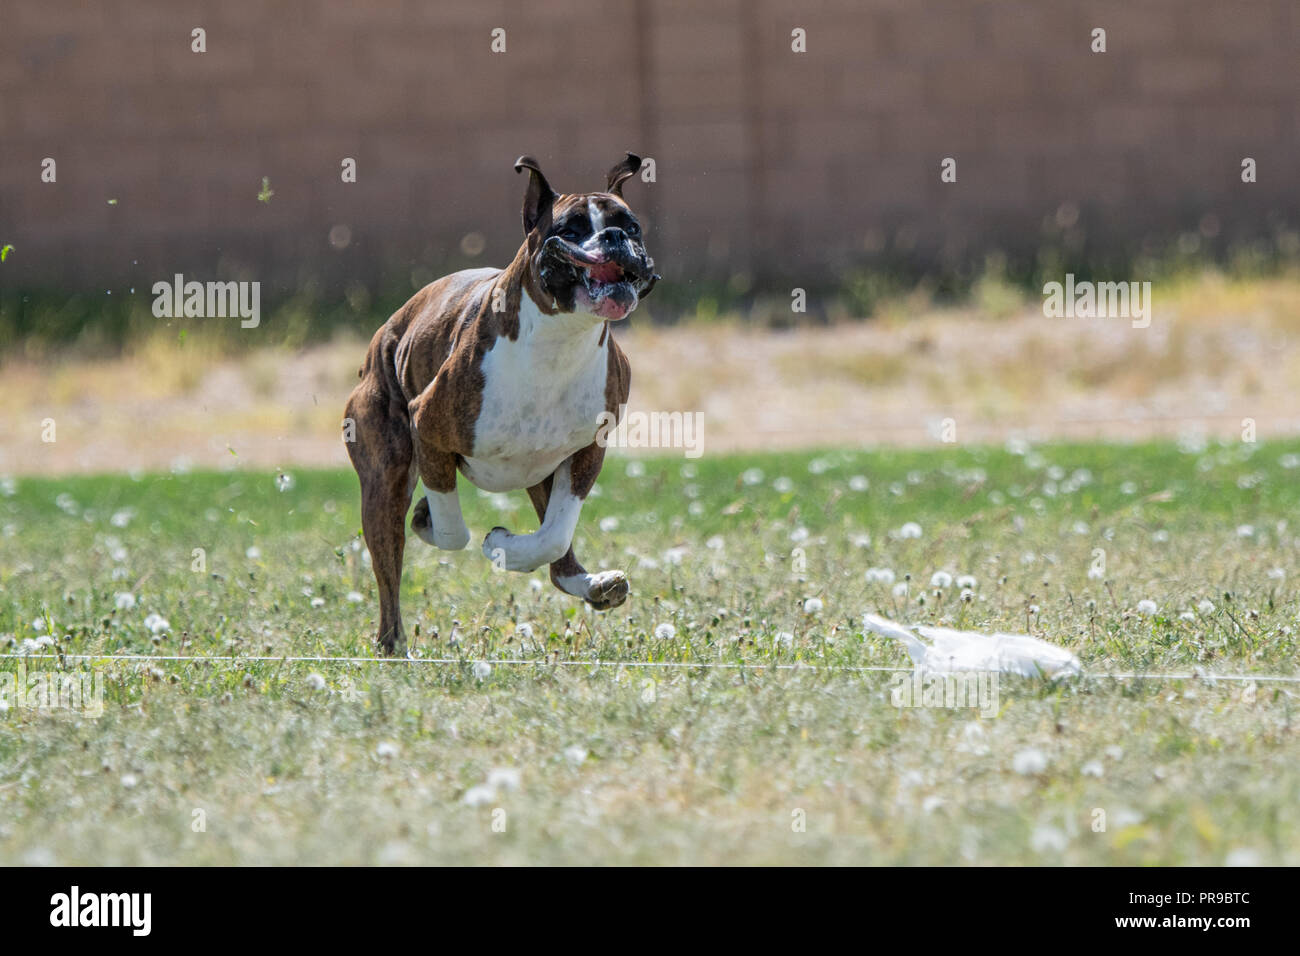 Boxer chasing a lure on a fastcat course Stock Photo